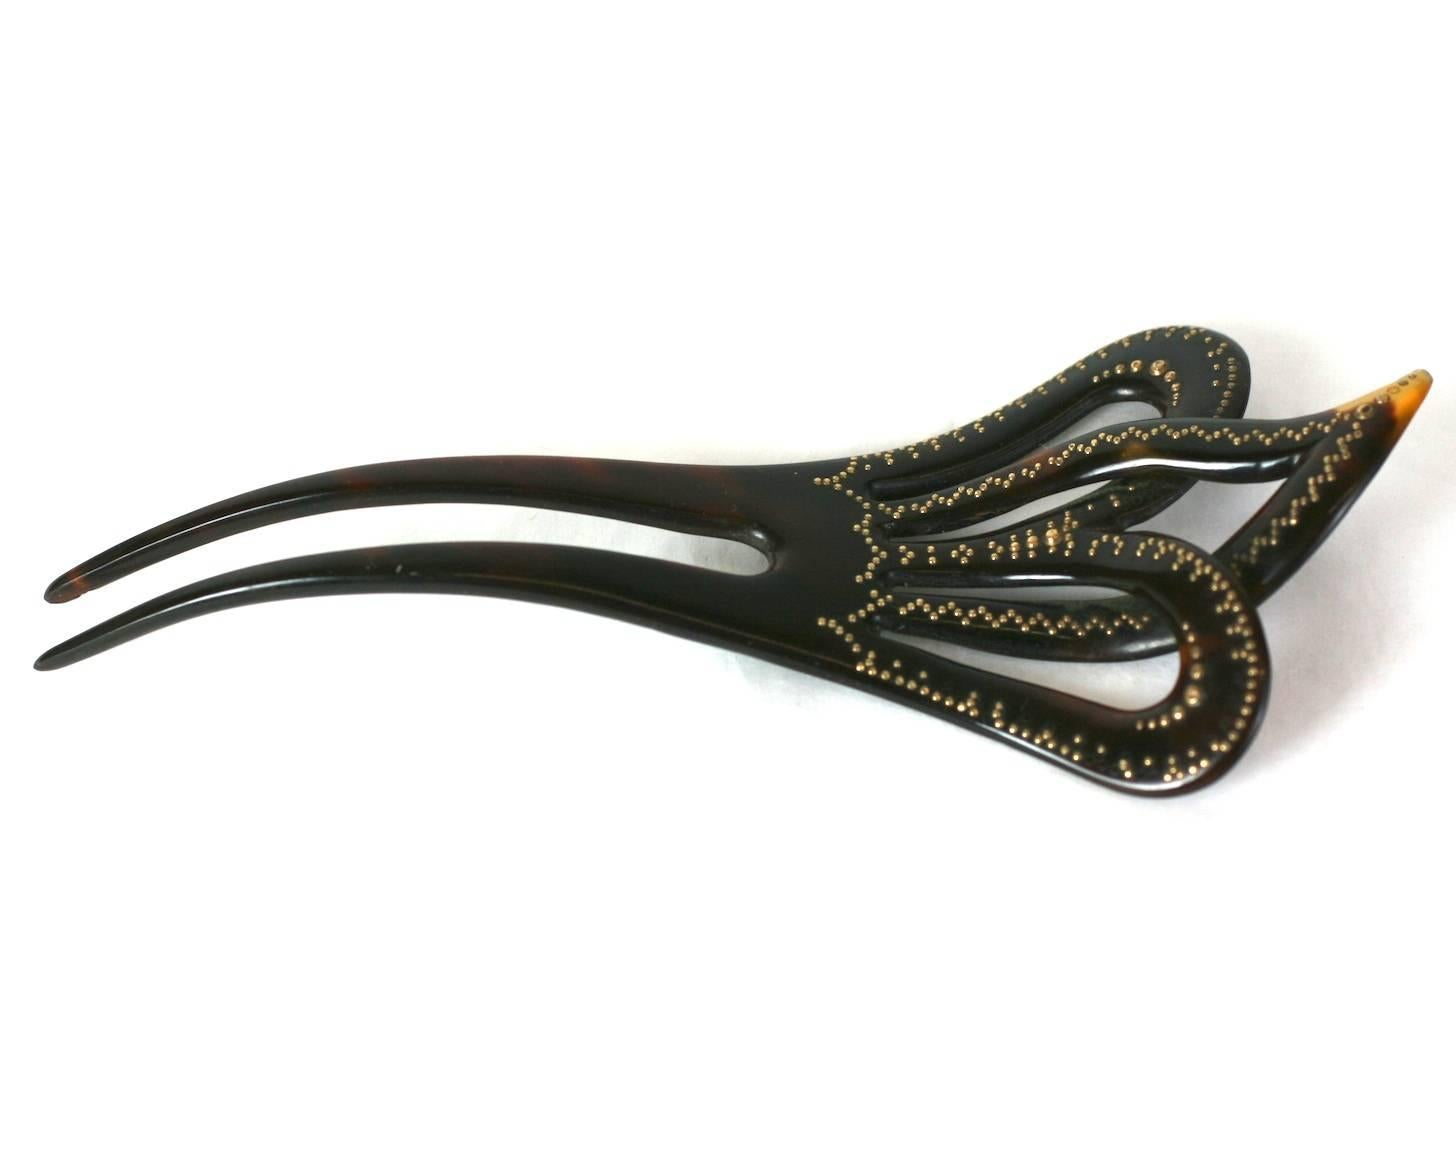 Victorian Tortoise Pique Comb from the late 19th Century. Hand carved tortoiseshell with finely applied gold accents. Lovely quality with interesting under carving of tortoise shell to create the dimension between the 3 lobes. 
Excellent condition.